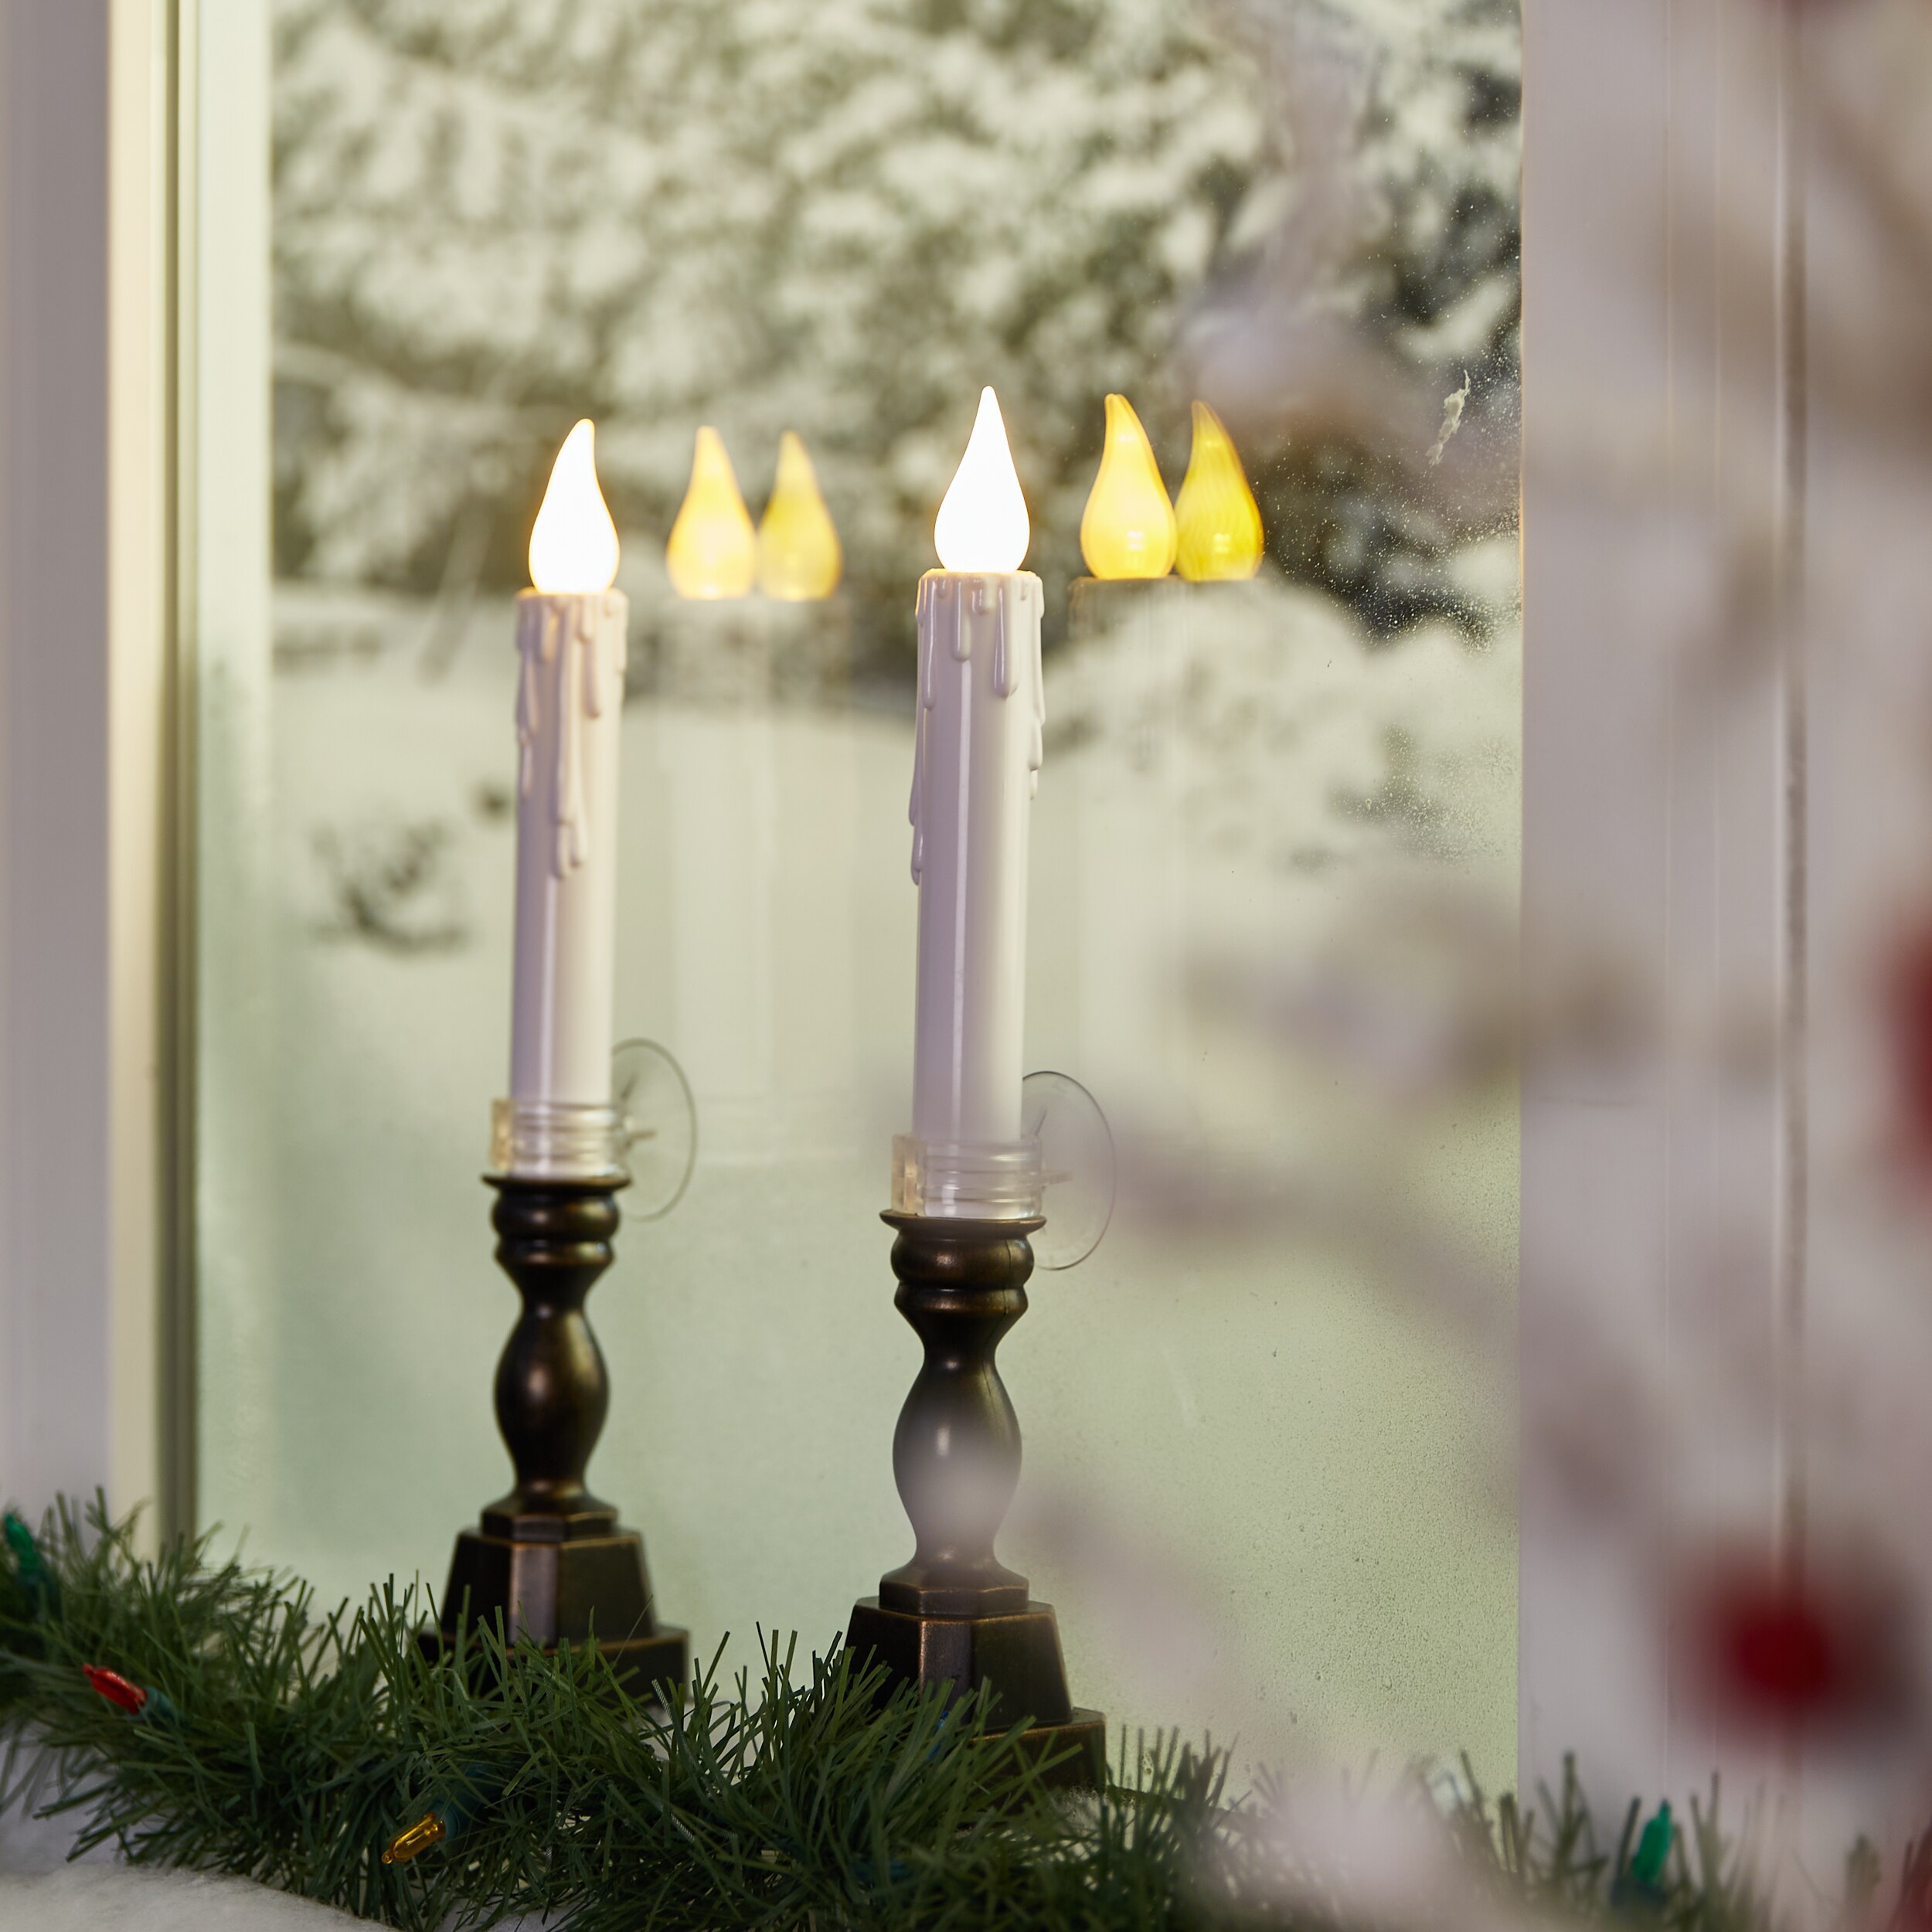 GE 12-in Decor Decor in Lighted the at Candle Christmas Christmas Battery-operated (2-Pack) department